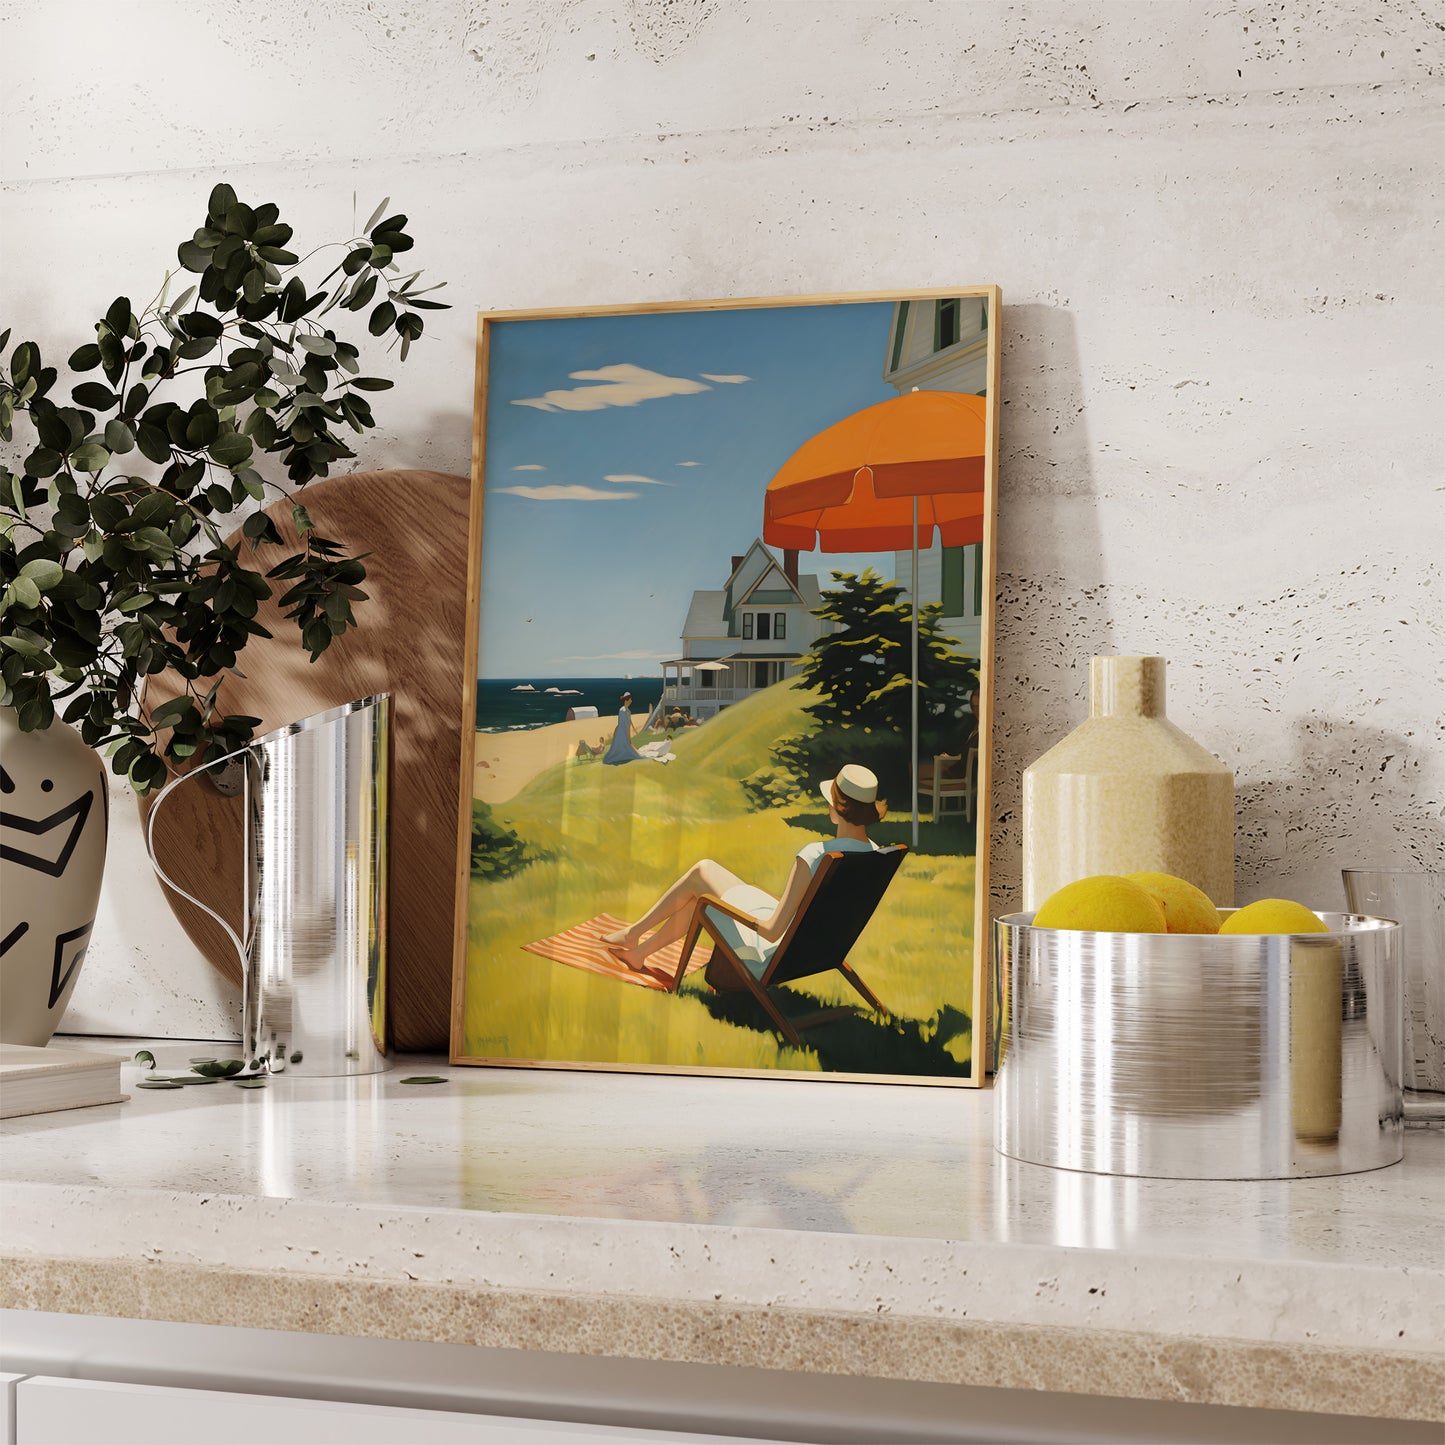 A framed beach painting displayed on a mantle with decorative items.